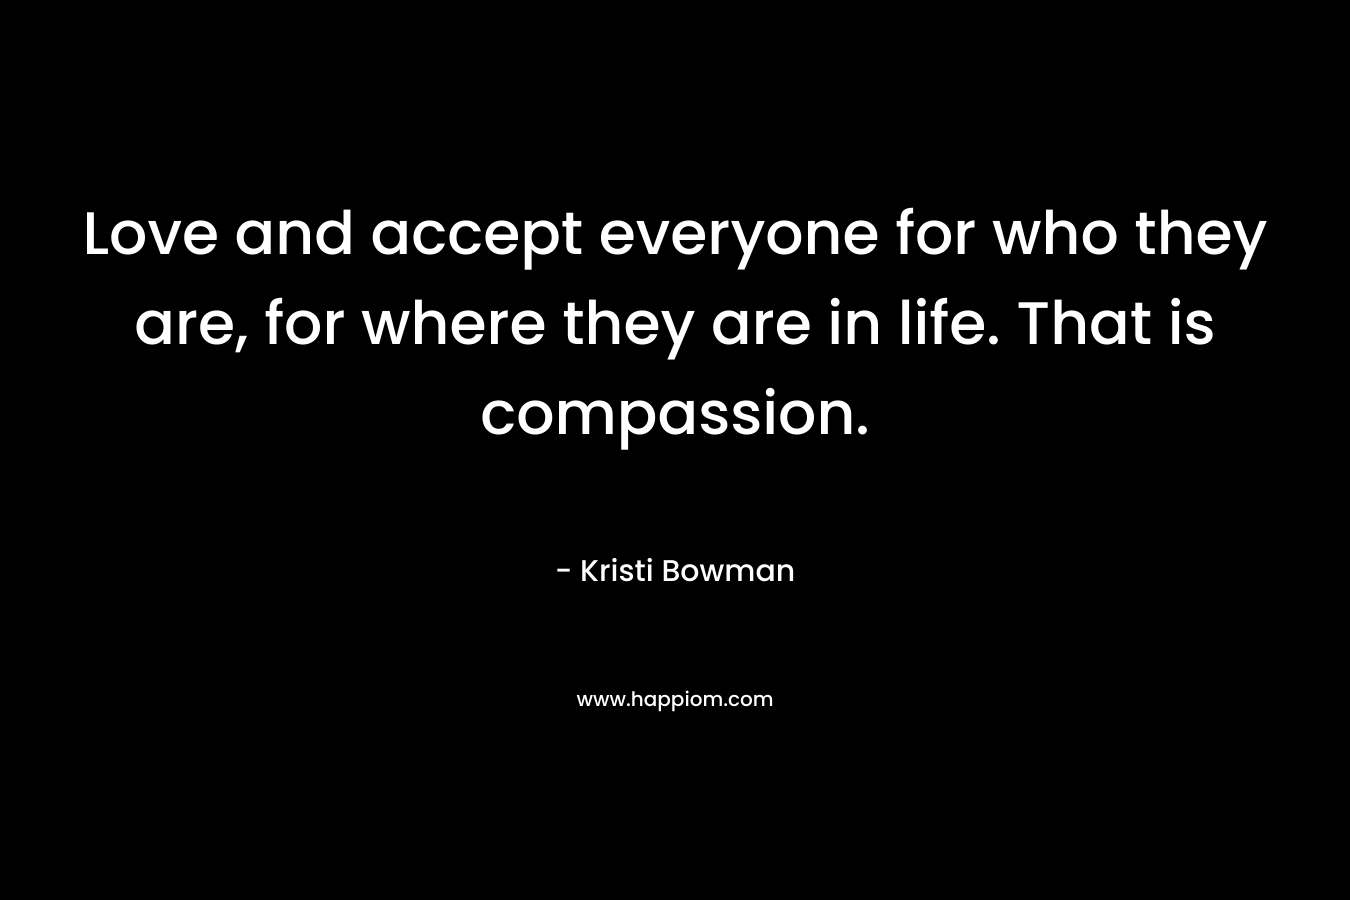 Love and accept everyone for who they are, for where they are in life. That is compassion.